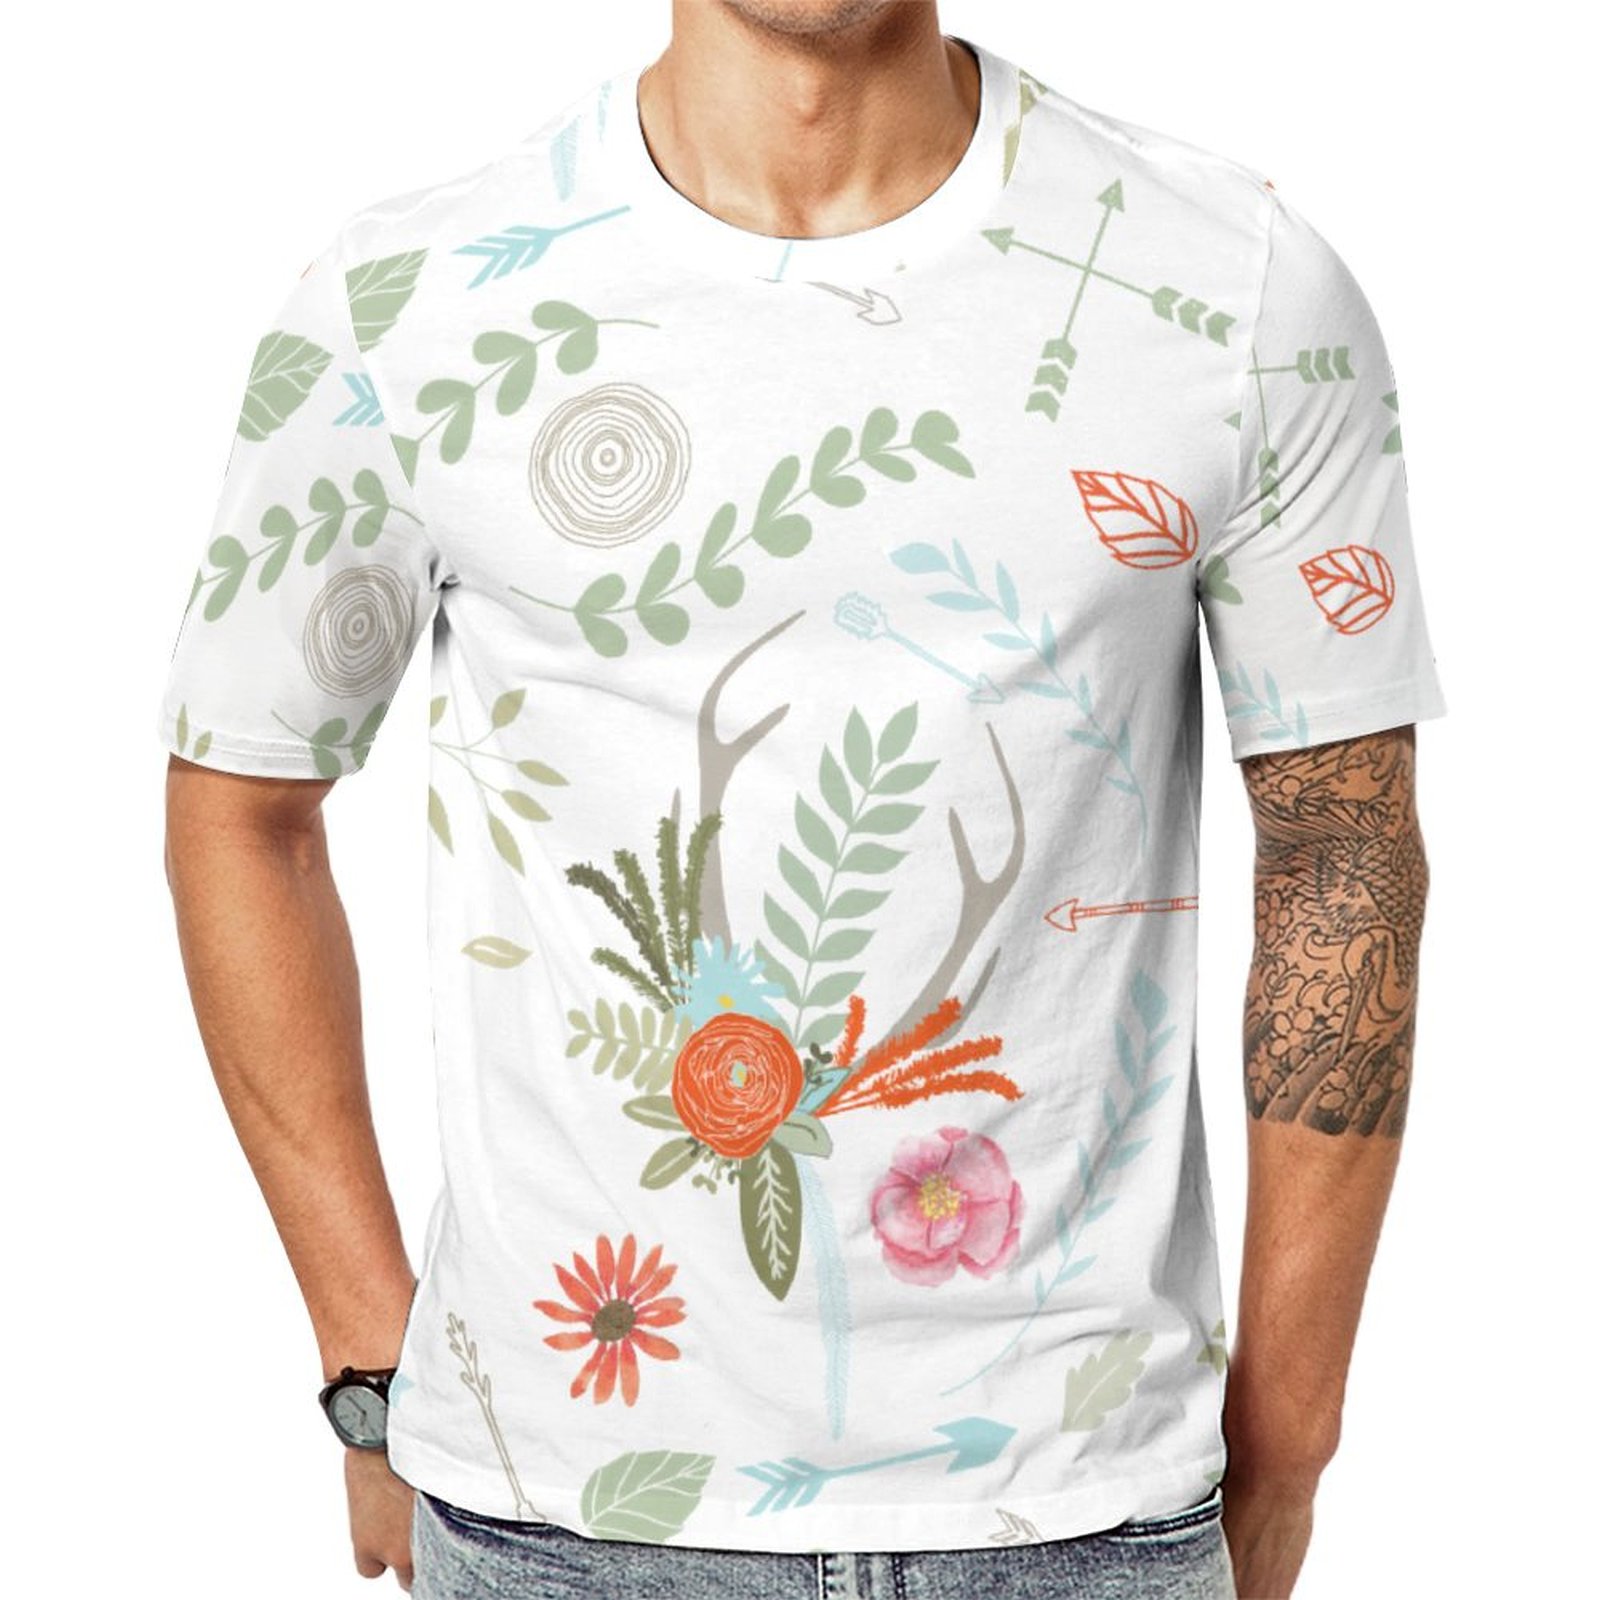 Forest Arrows And Deer Antler Floral Short Sleeve Print Unisex Tshirt Summer Casual Tees for Men and Women Coolcoshirts